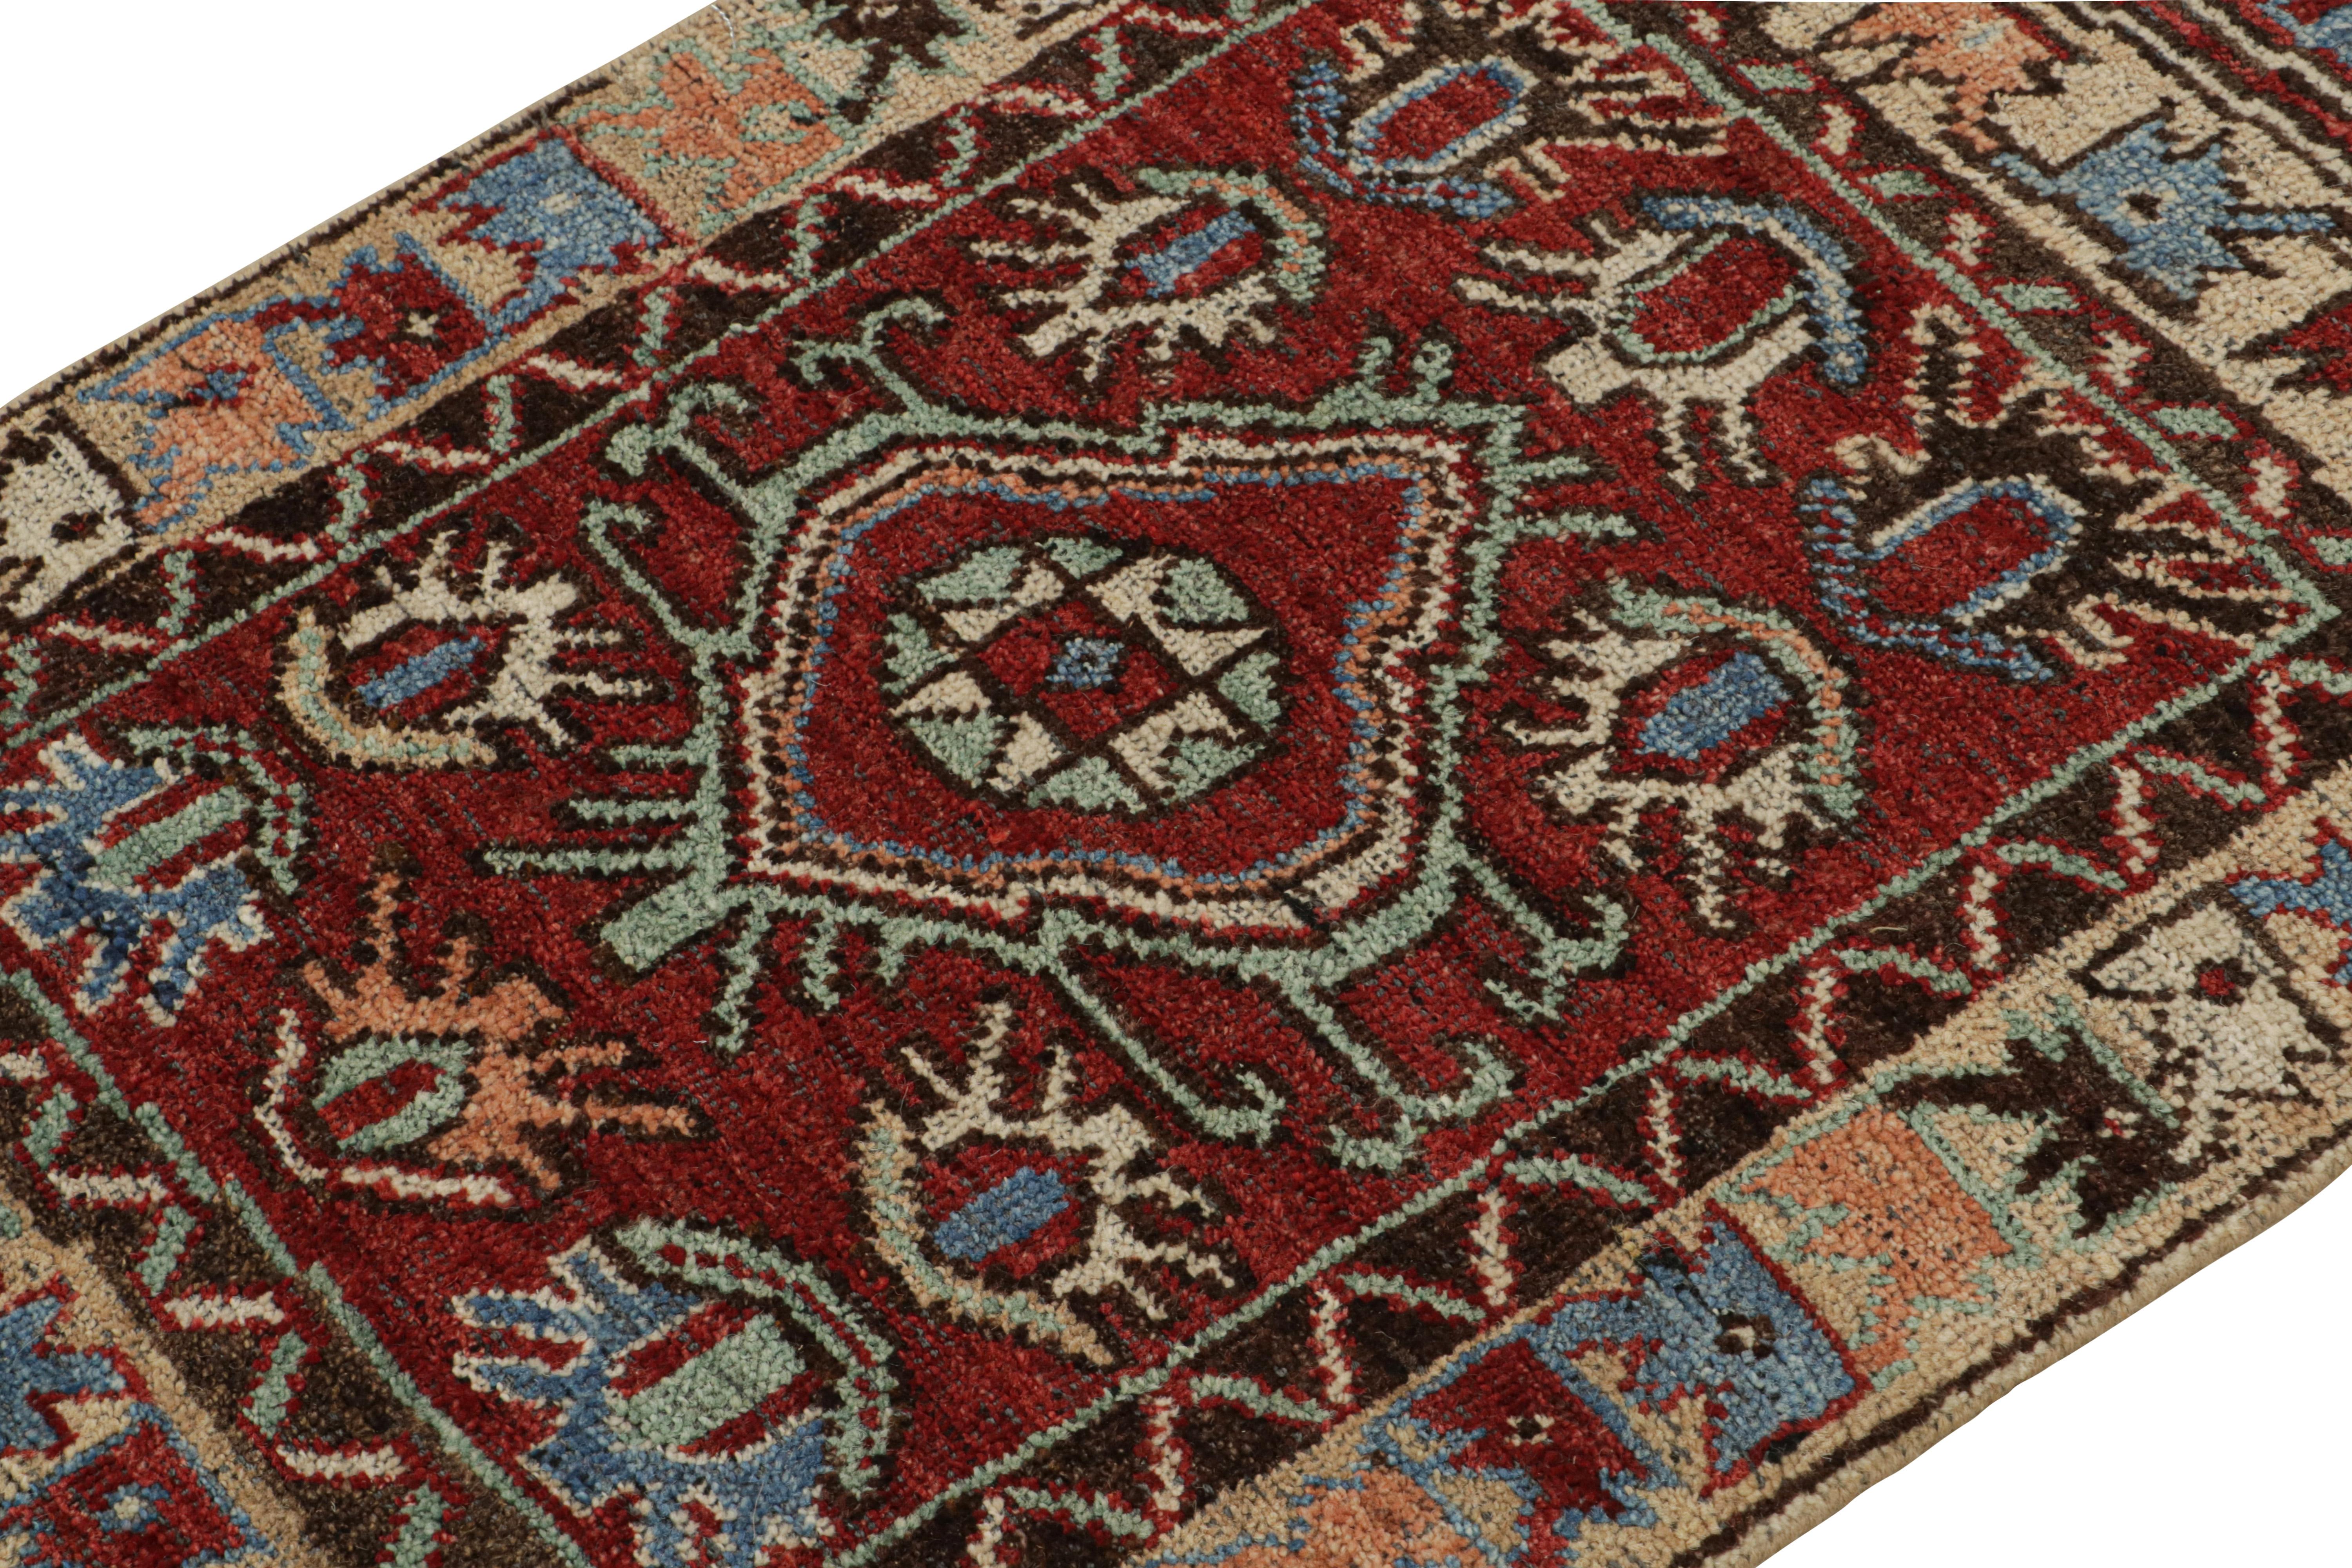 Hand-Knotted Rug & Kilim’s Antique Tribal Style Rug in Red with Geometric Patterns For Sale